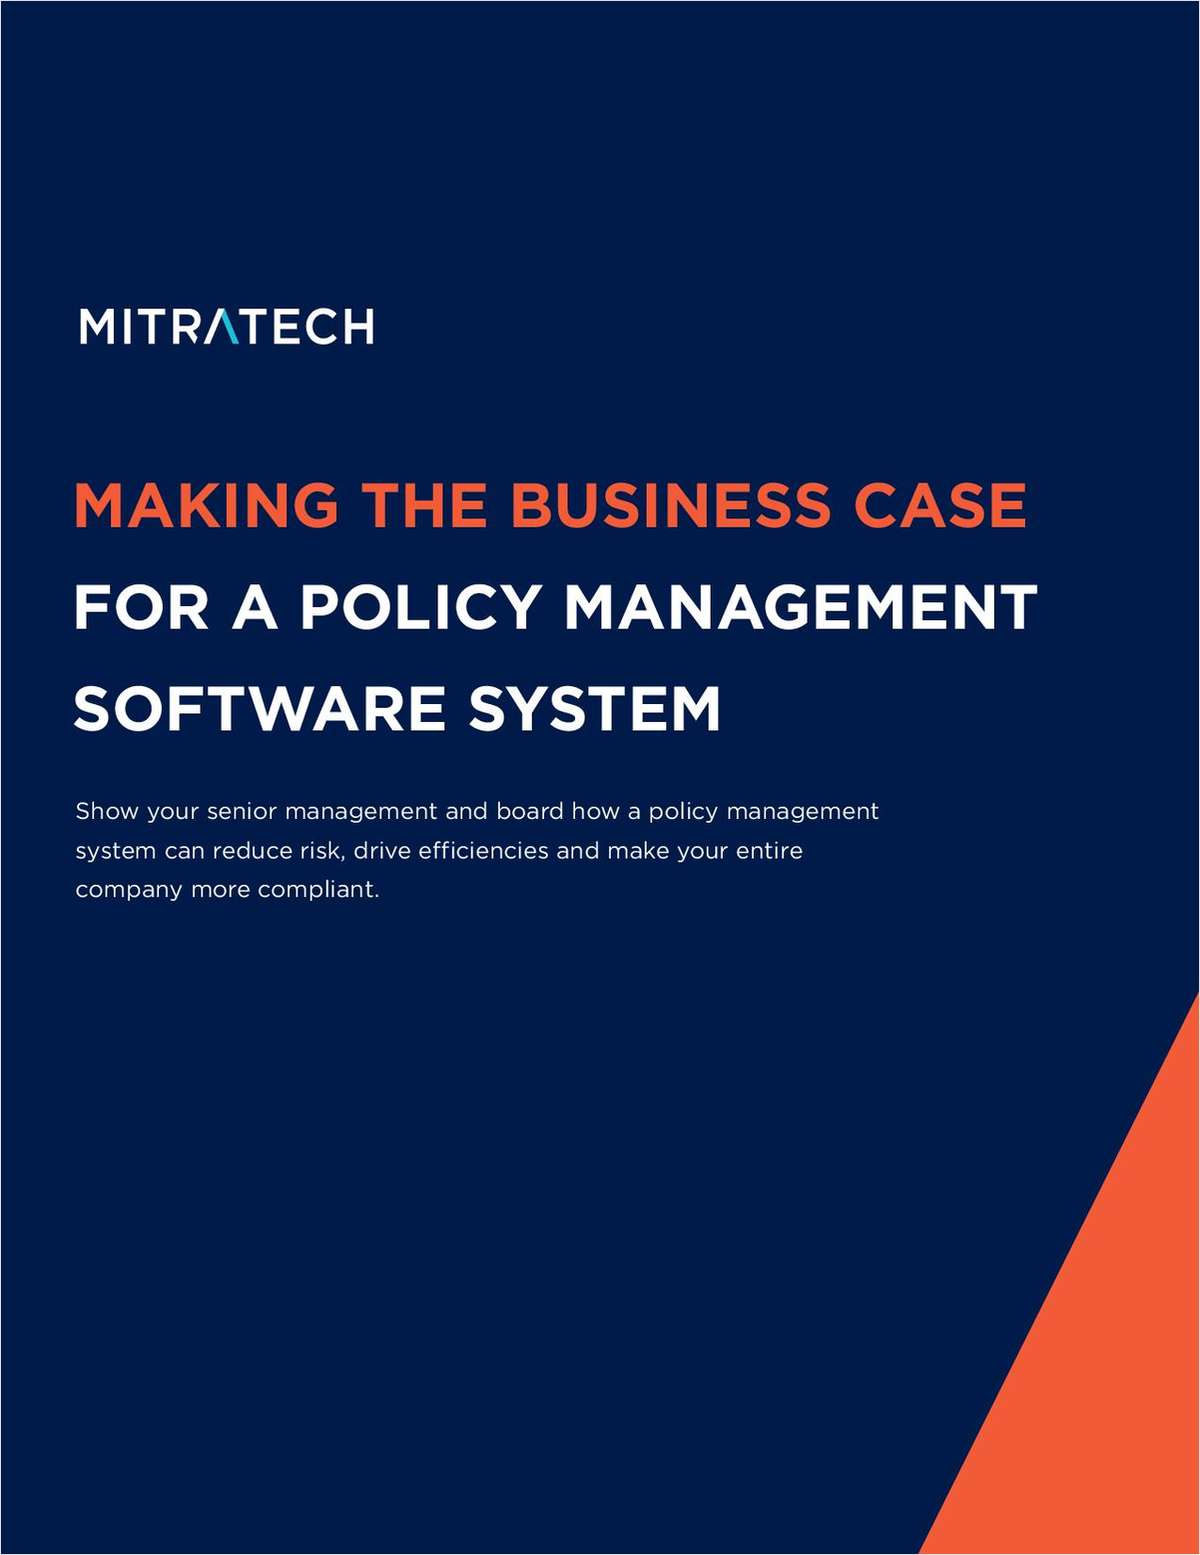 Making the Business Case for a Policy Management Software System